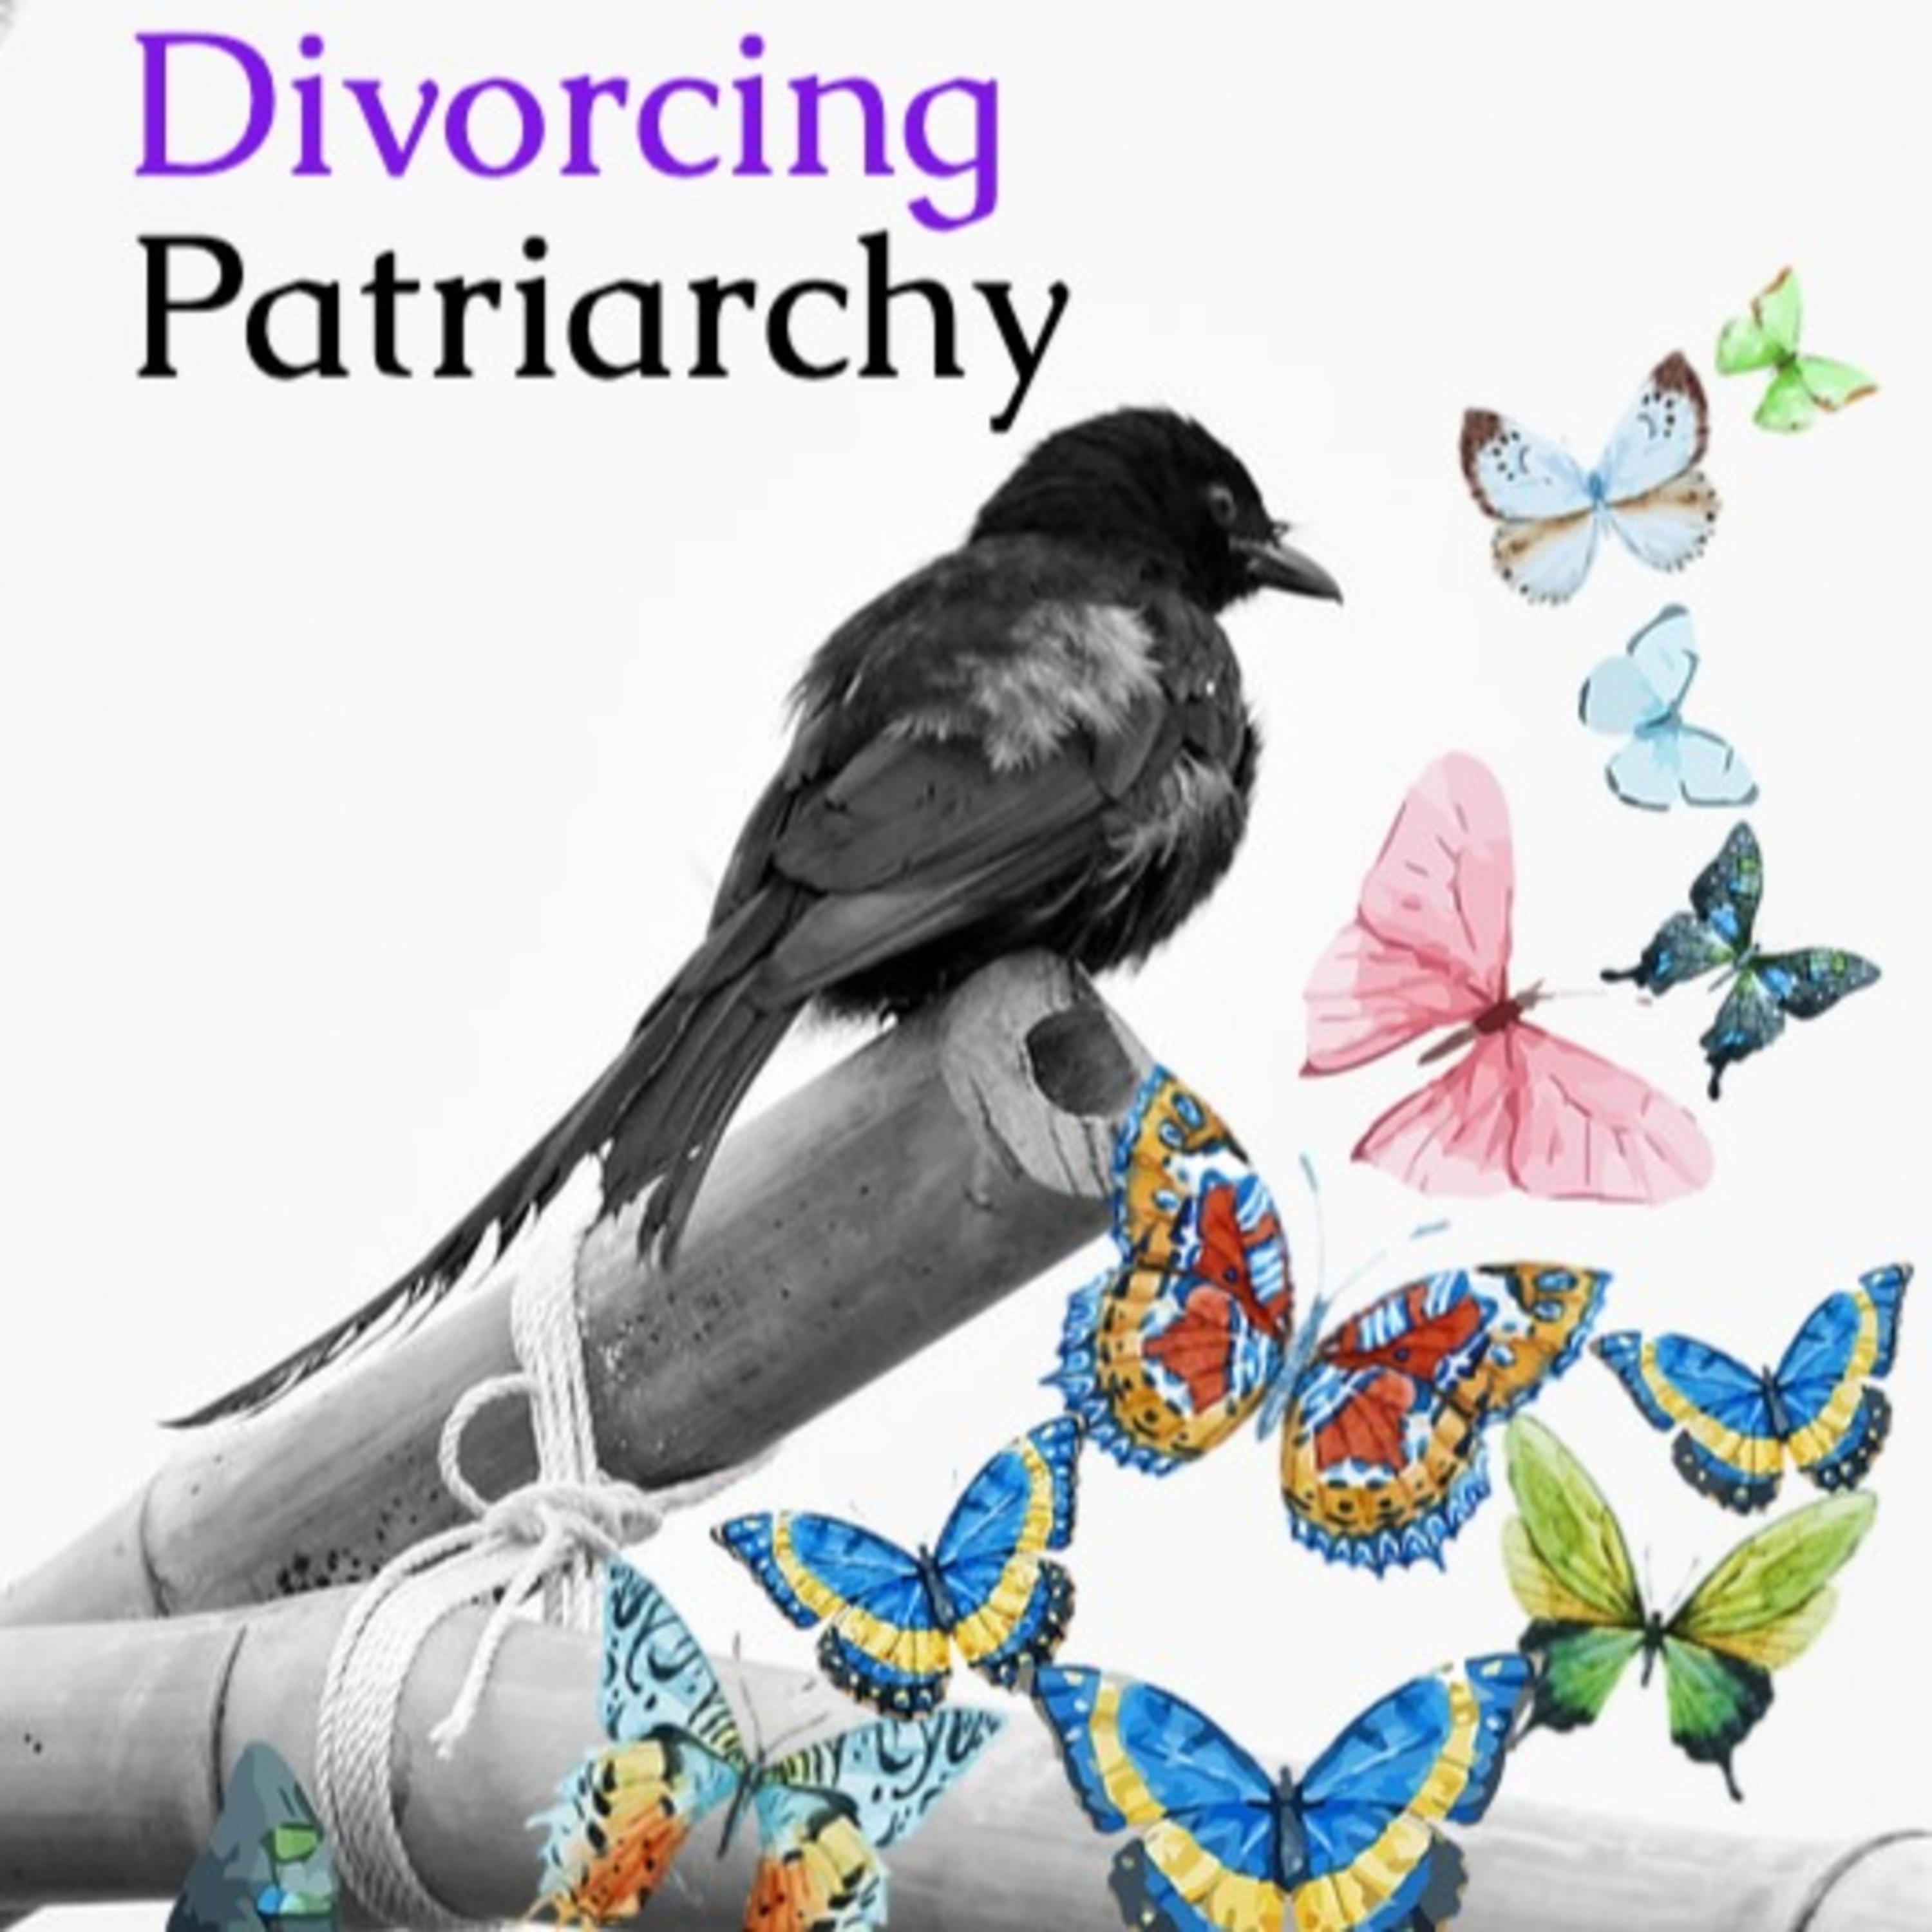 Breaking Free From the Patriarchy: The 4 Things You Need to Do